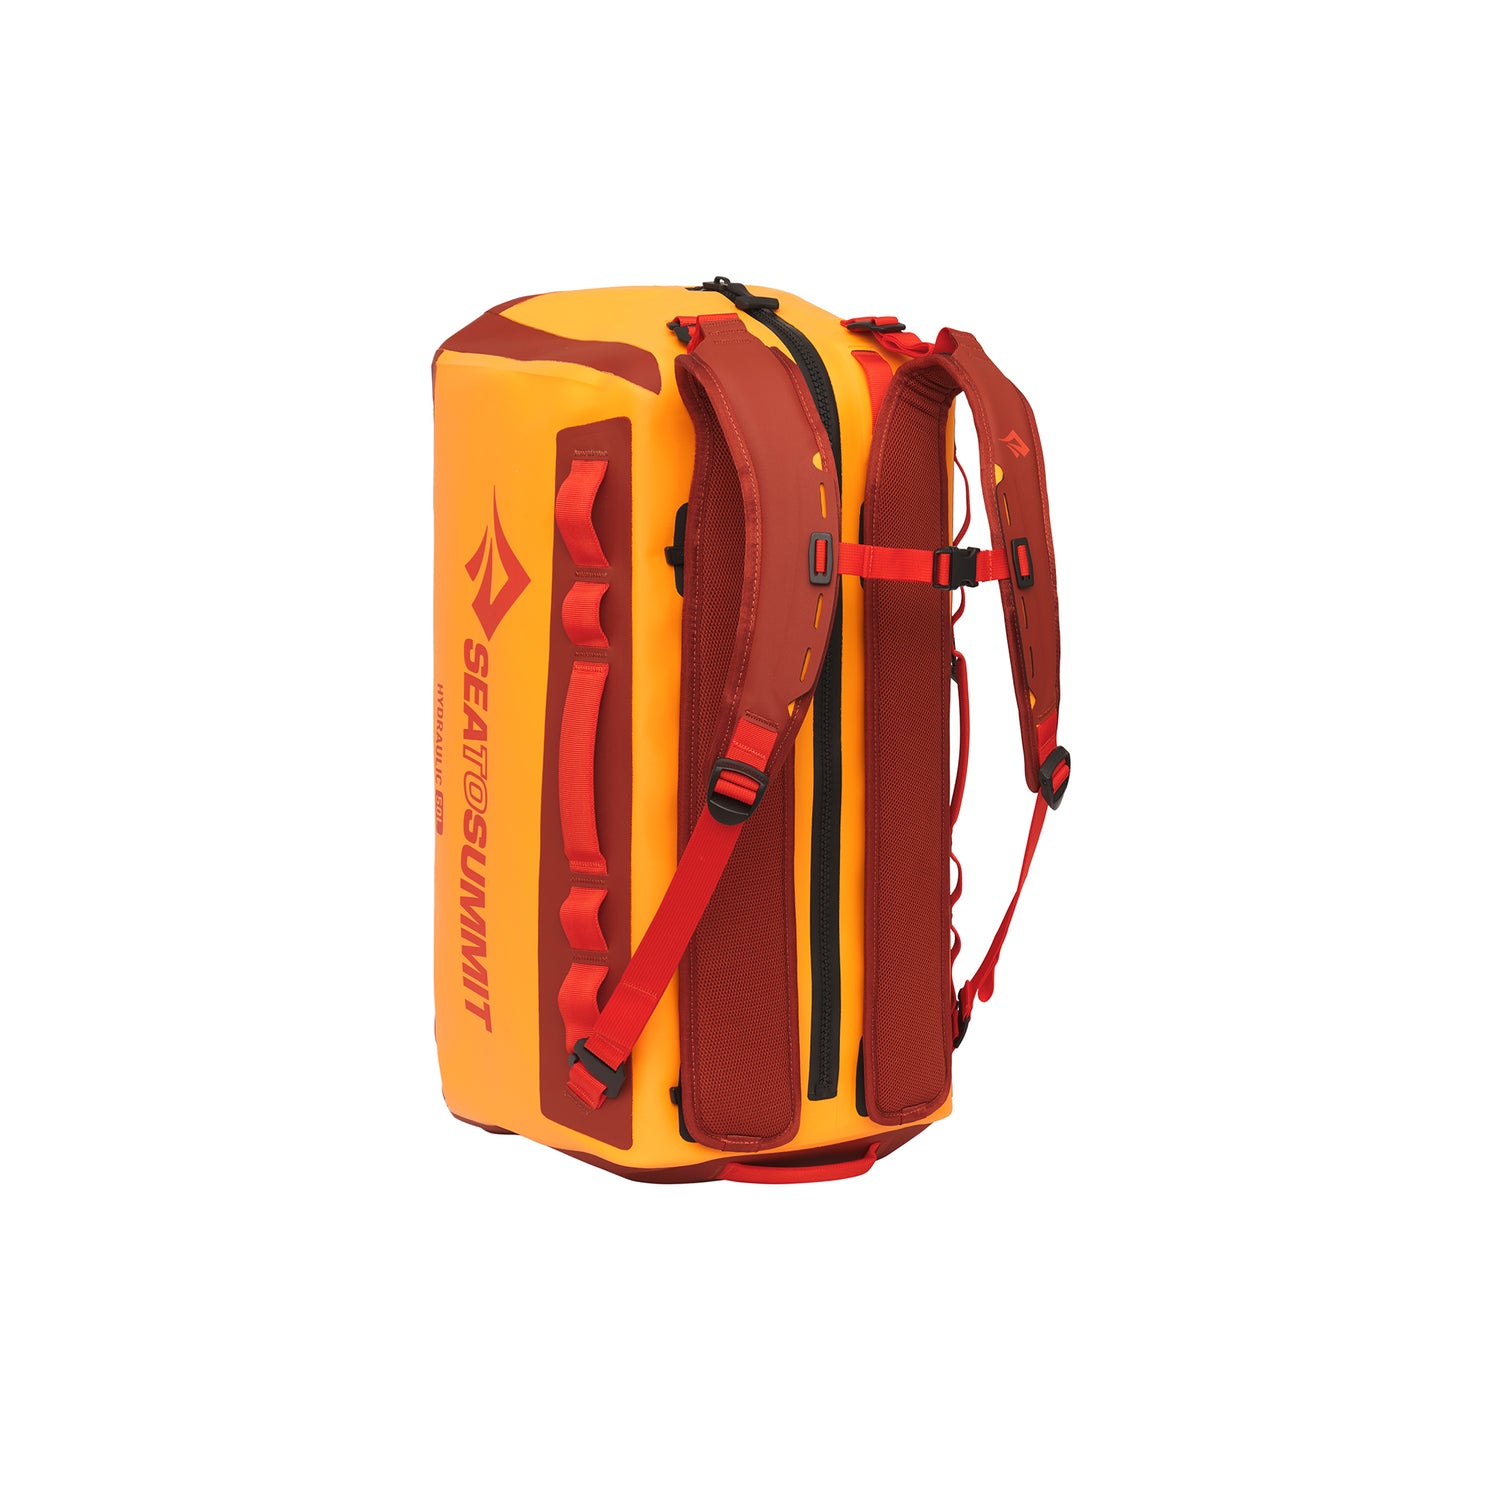 50 liter || Hydraulic Pro Dry Pack Picante